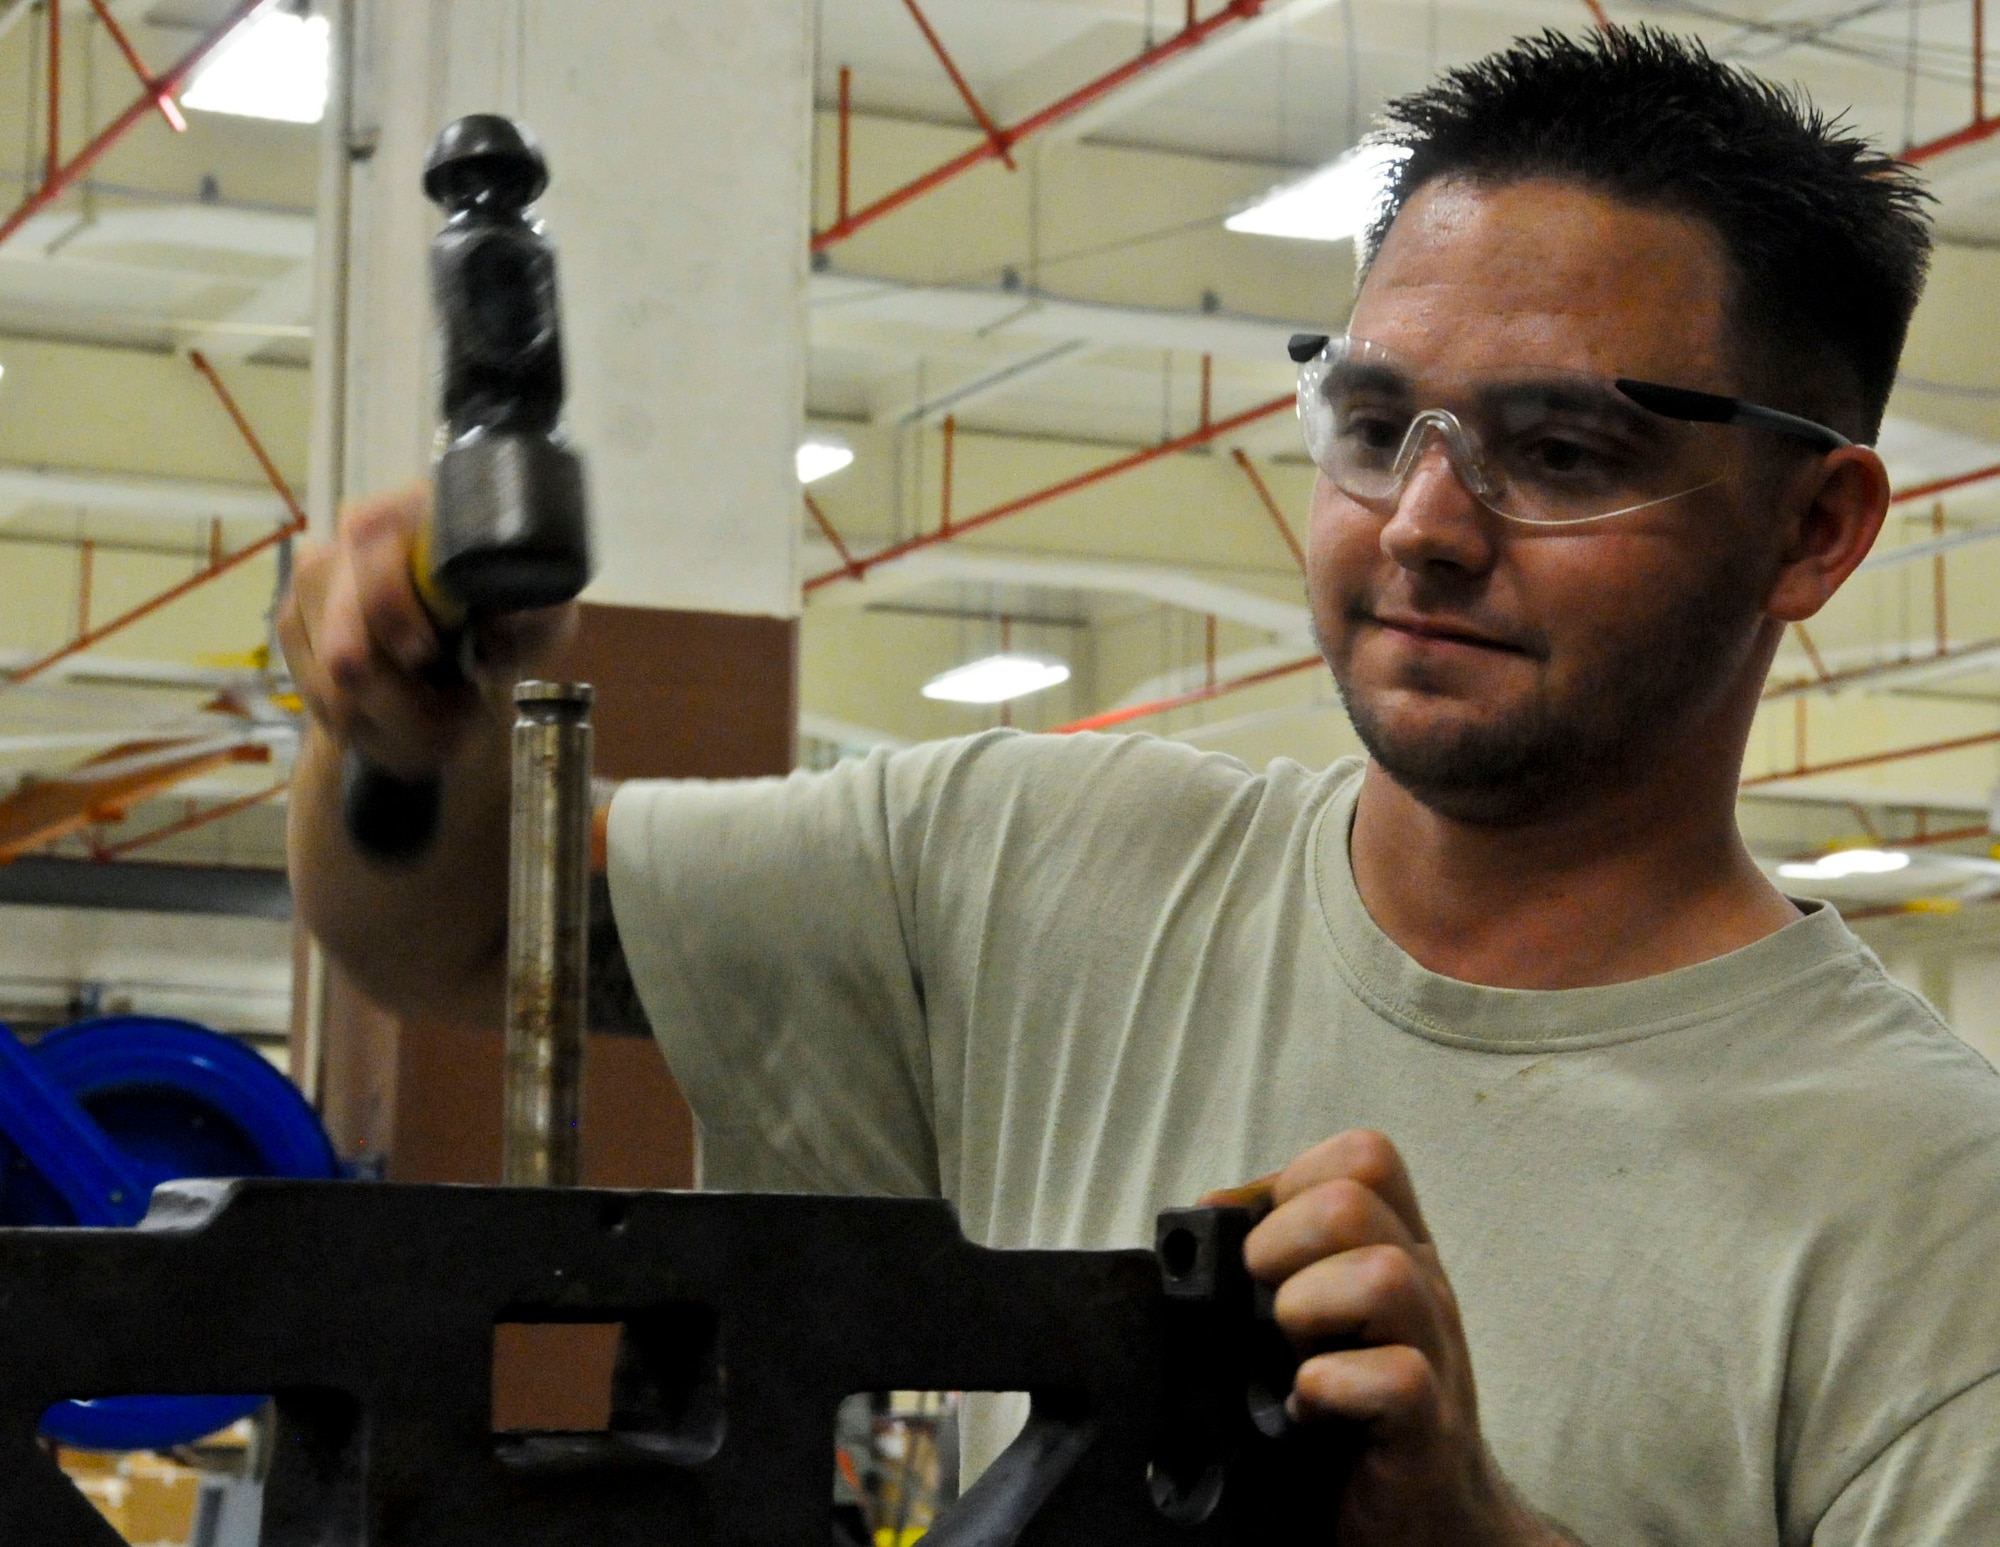 Staff Sgt. Christopher Cacciatore, 36th Maintenance Squadron aerospace ground equipment journeyman, removes a munitions loader manipulator head during Exercise Beverly Palm 13-05 on Andersen Air Force Base, Guam, Sept. 9, 2013. During the exercise, Andersen Airmen practiced their ability to react, defend and execute operations in a wartime scenario. (U.S. Air Force photo by Airman 1st Class Amanda Morris/Released)